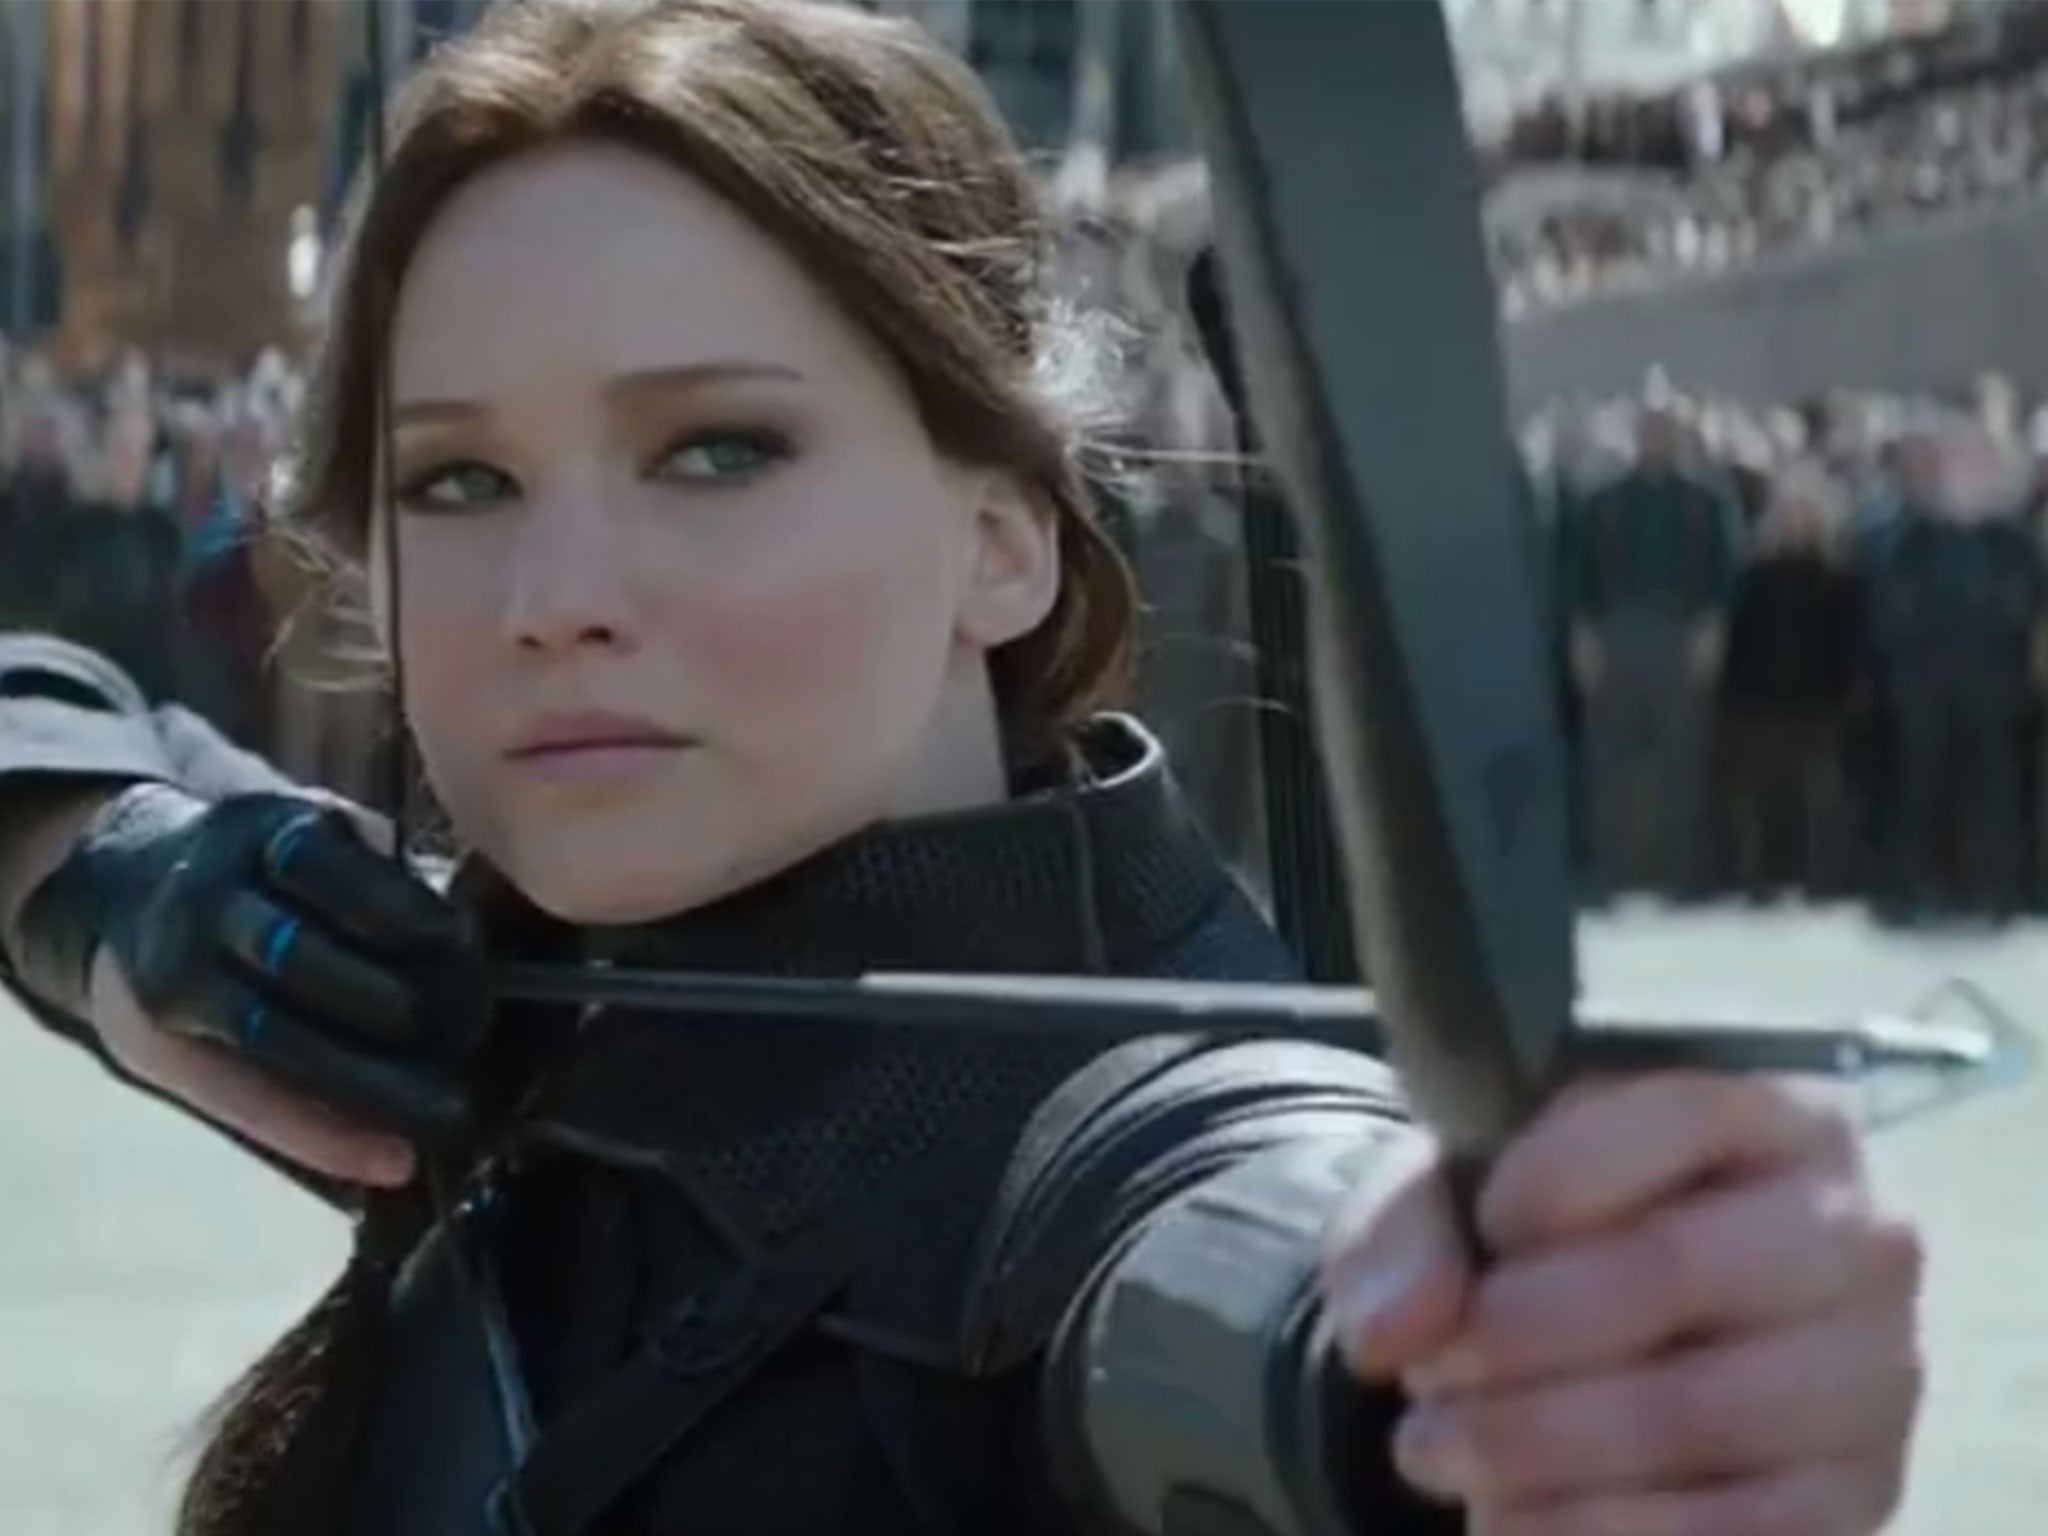 Jennifer Lawrence leads an all-out revolution in the final Hunger Games film, Mockingjay Part 2